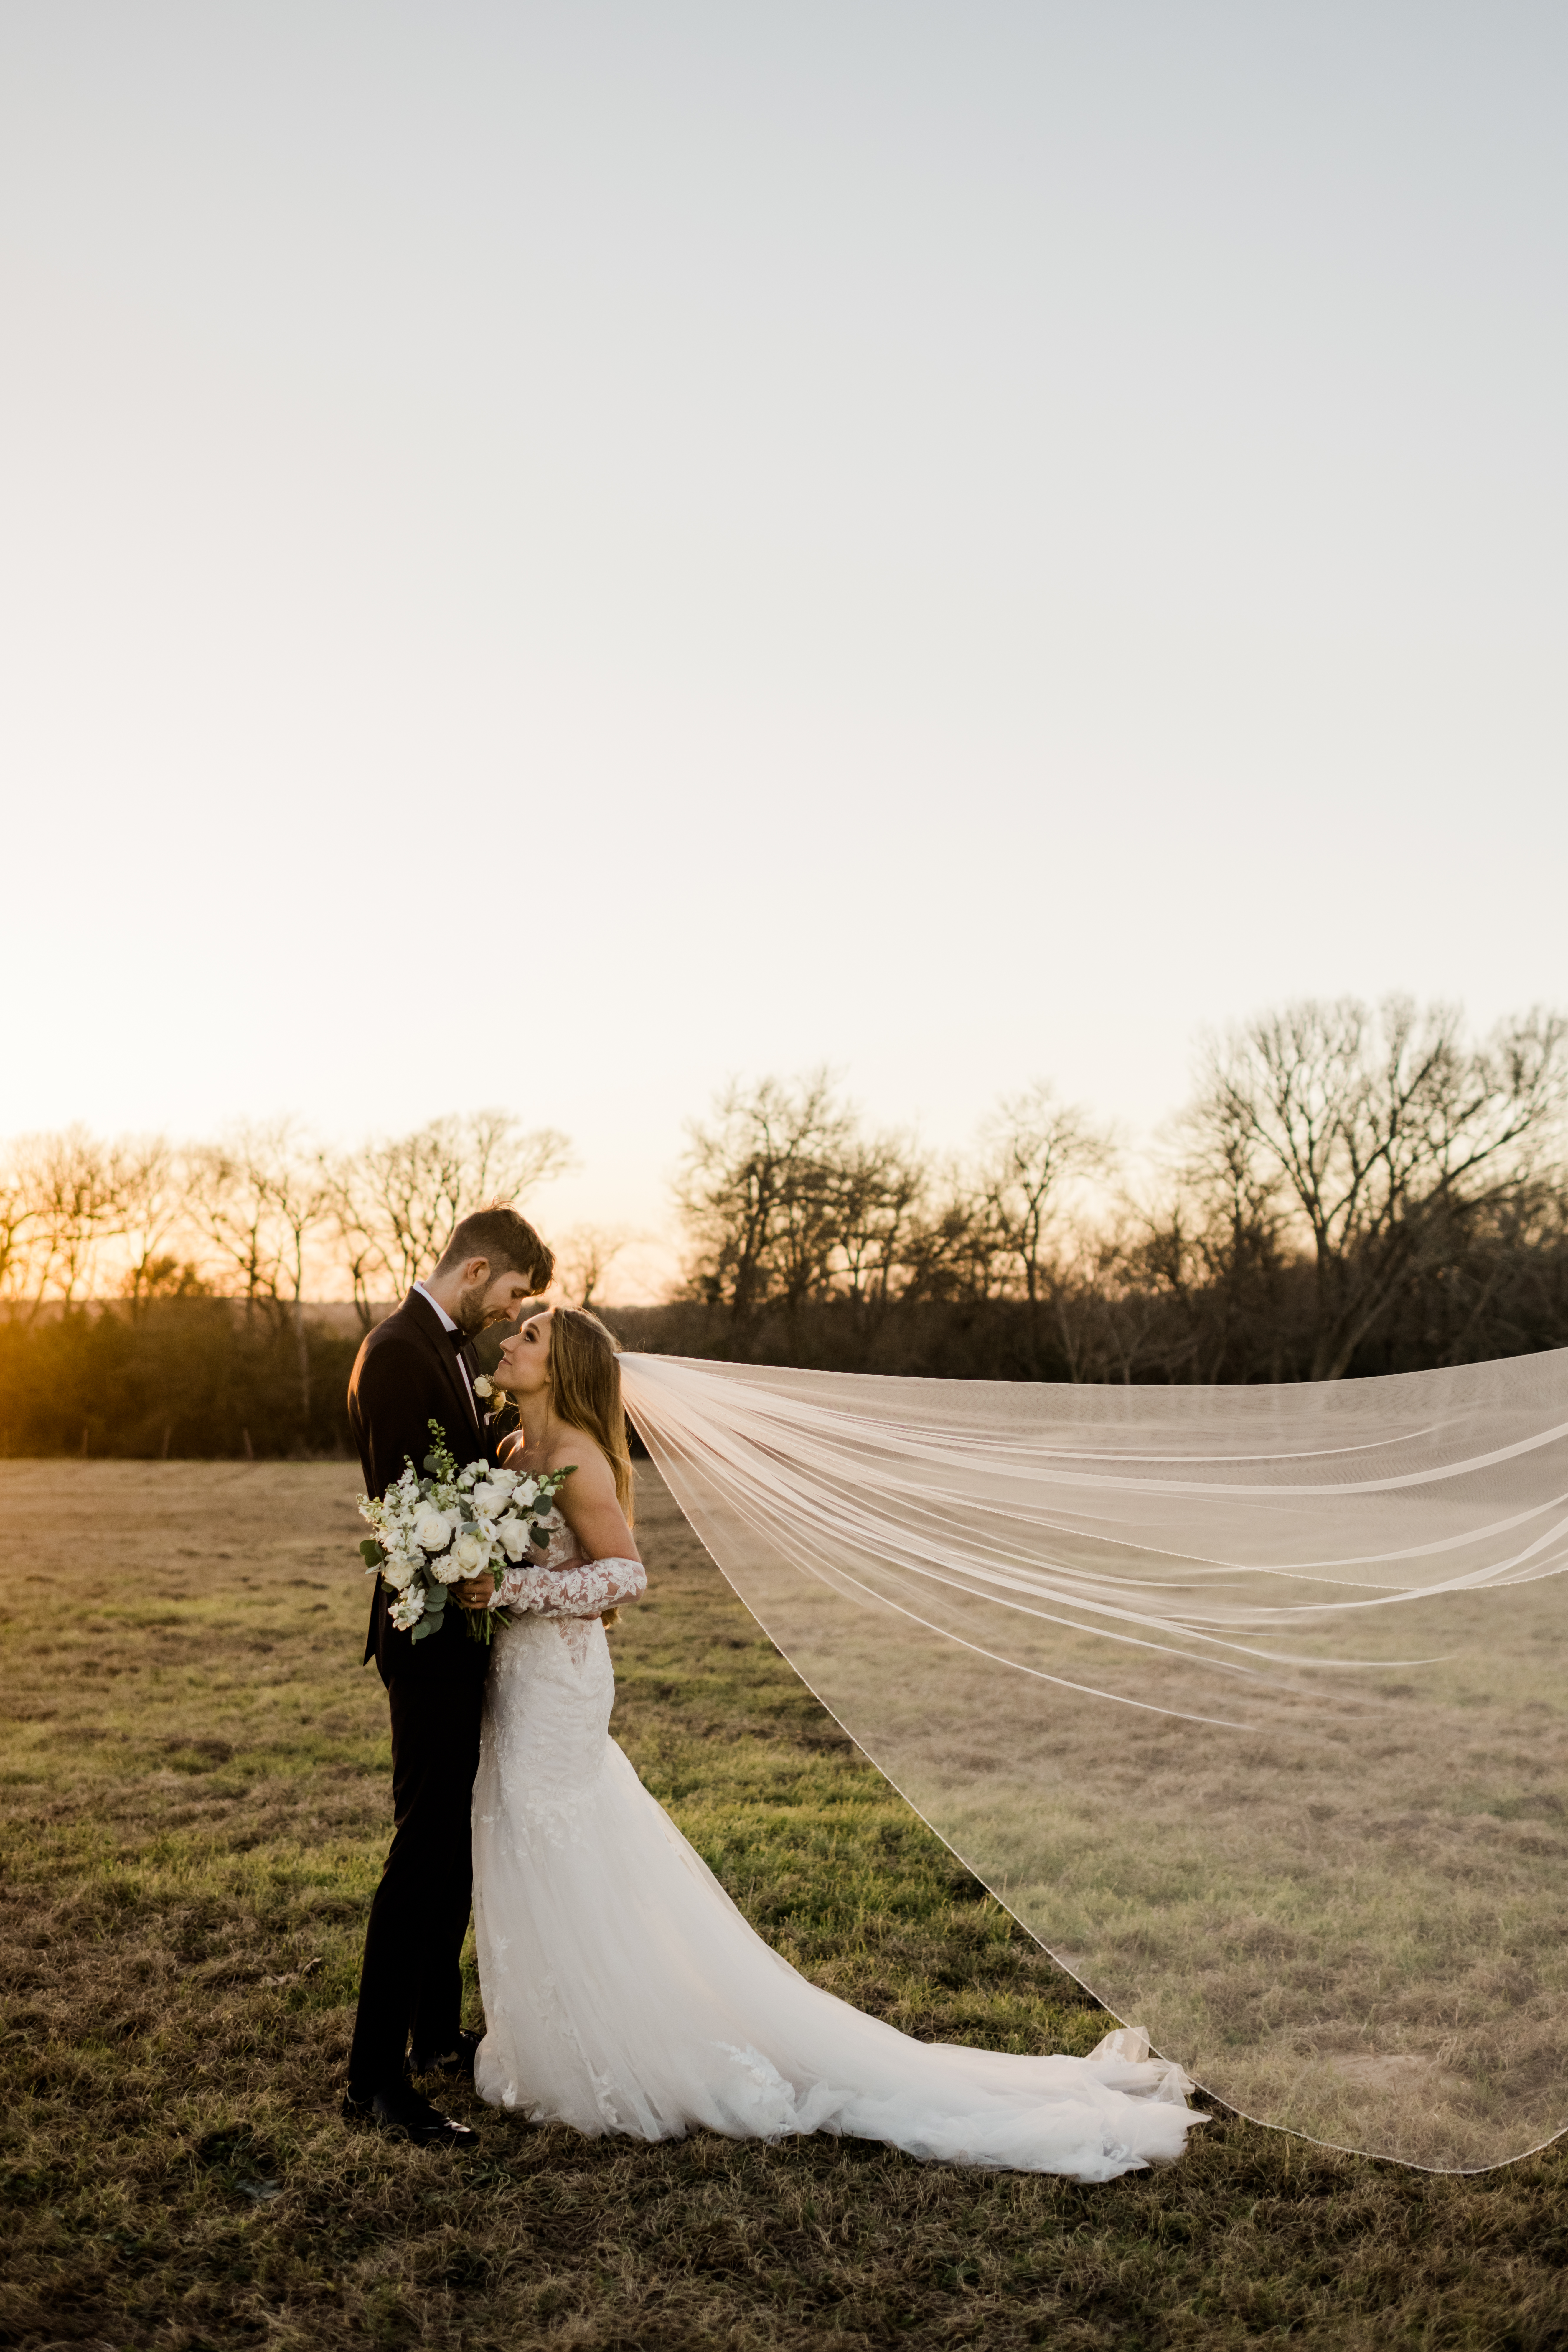 Courteney & Chase's Wedding at Deep in the Heart Farms in Brenham, TX with Rachel Driskell Photography